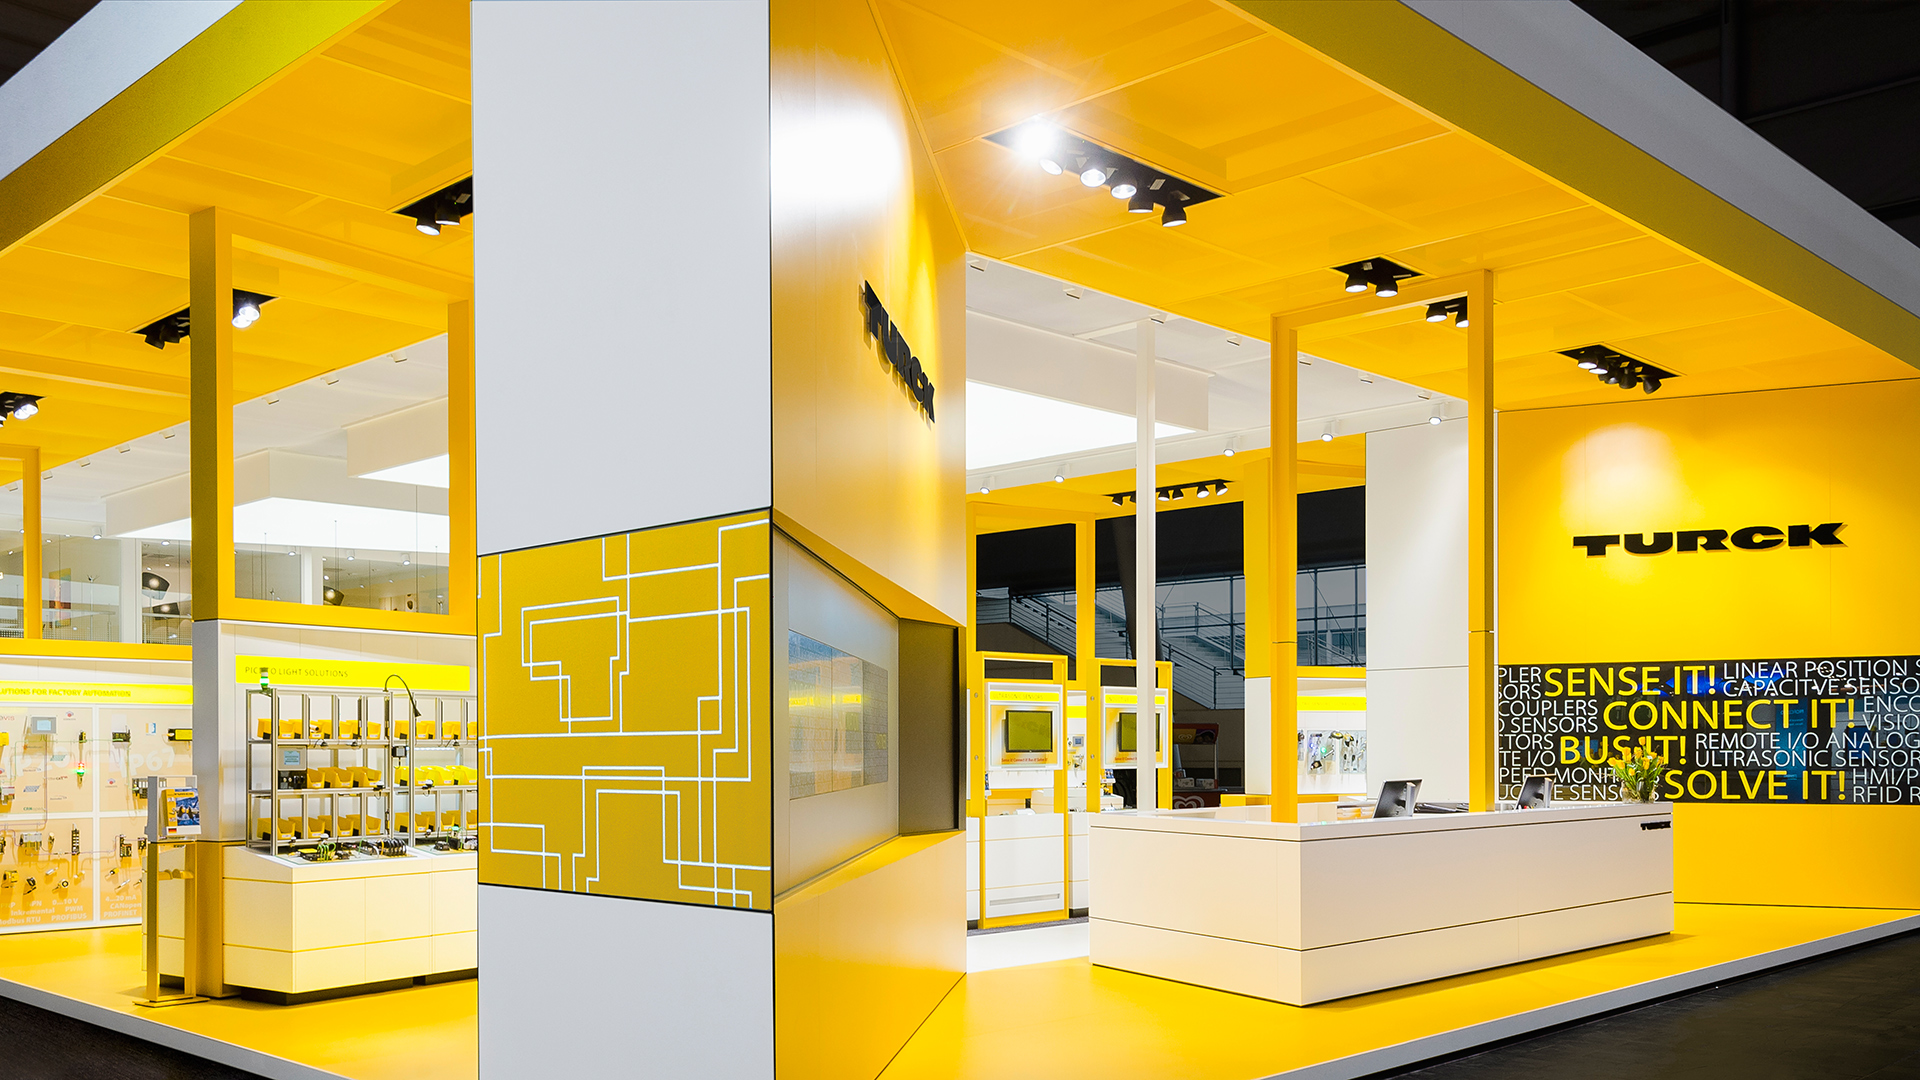 Dart stages the Turck fair stand at the HMI 2014